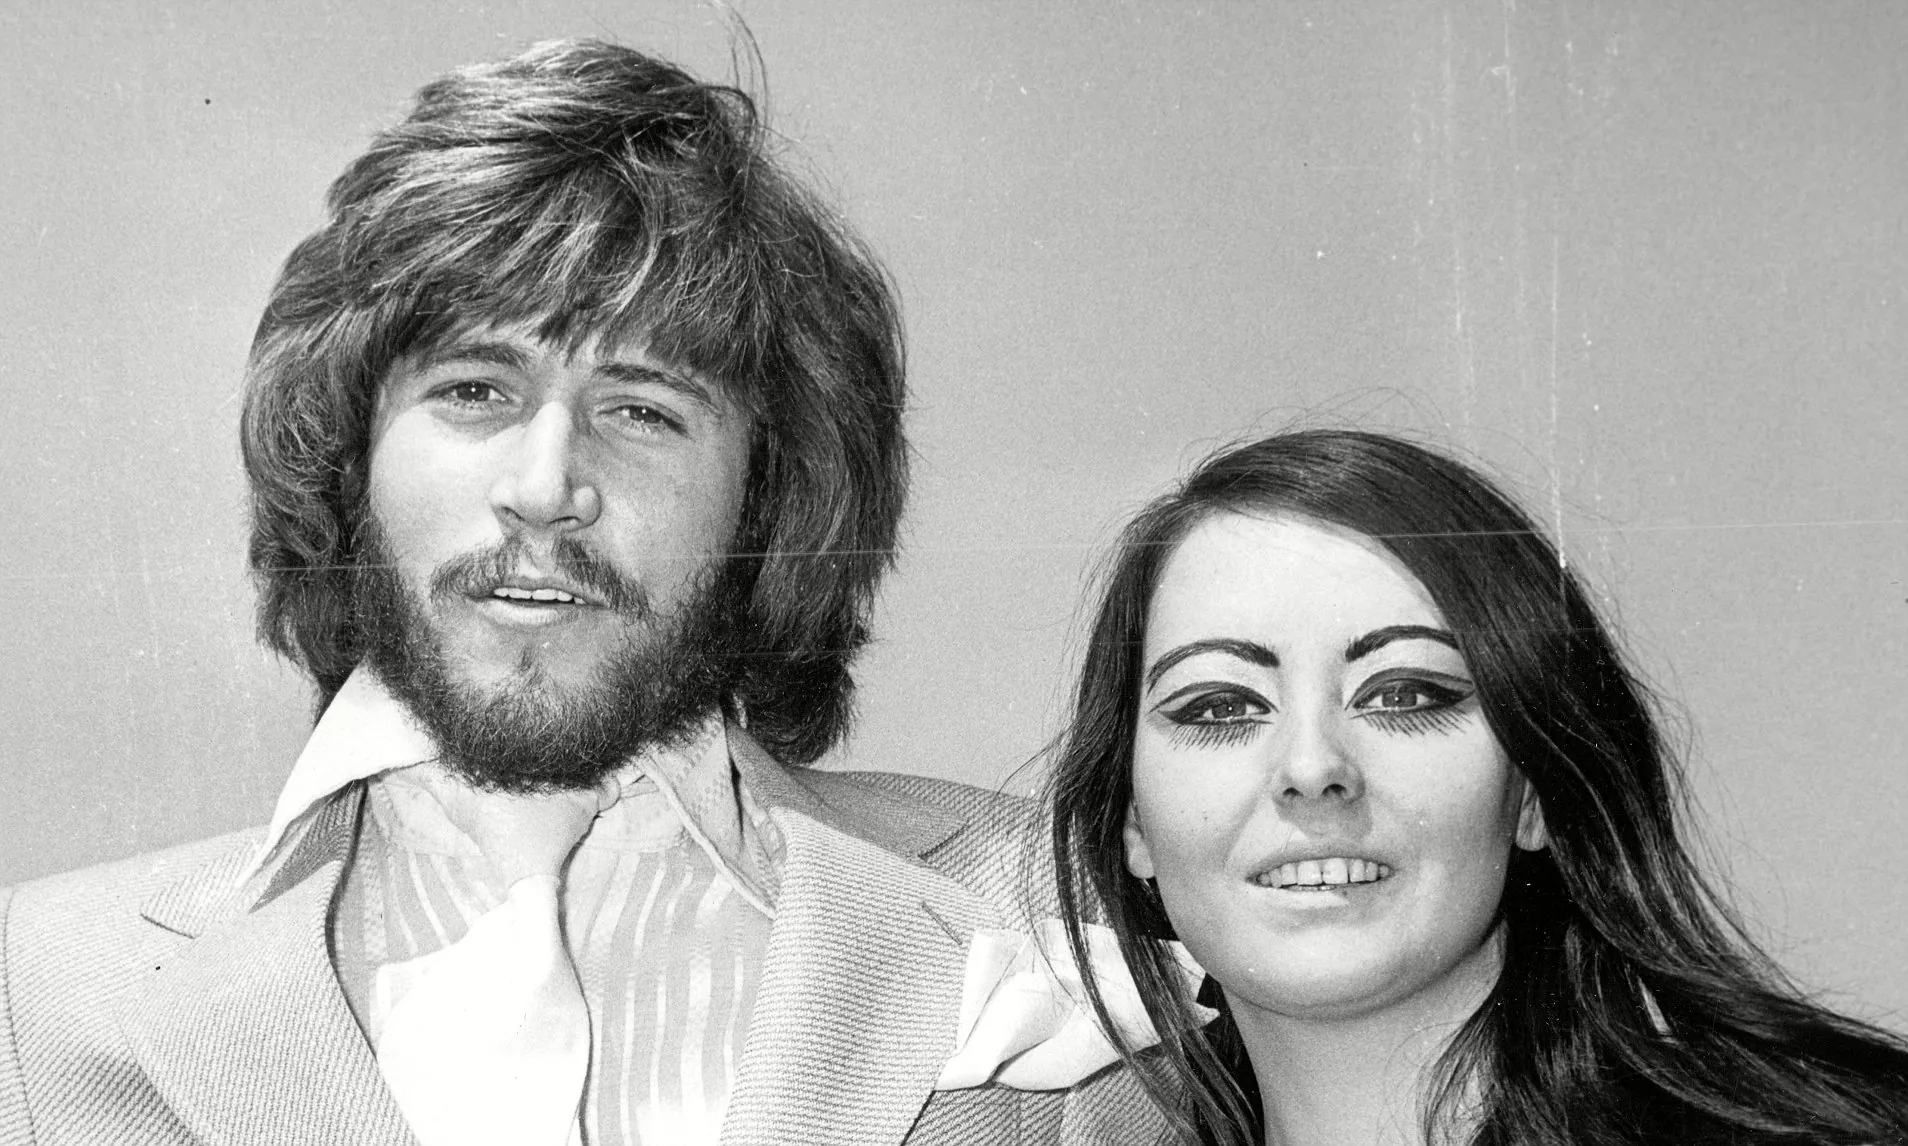 Barry Gibb Of The Bee Gees Pop Group With Wife Linda Gray At London Airport 1970.